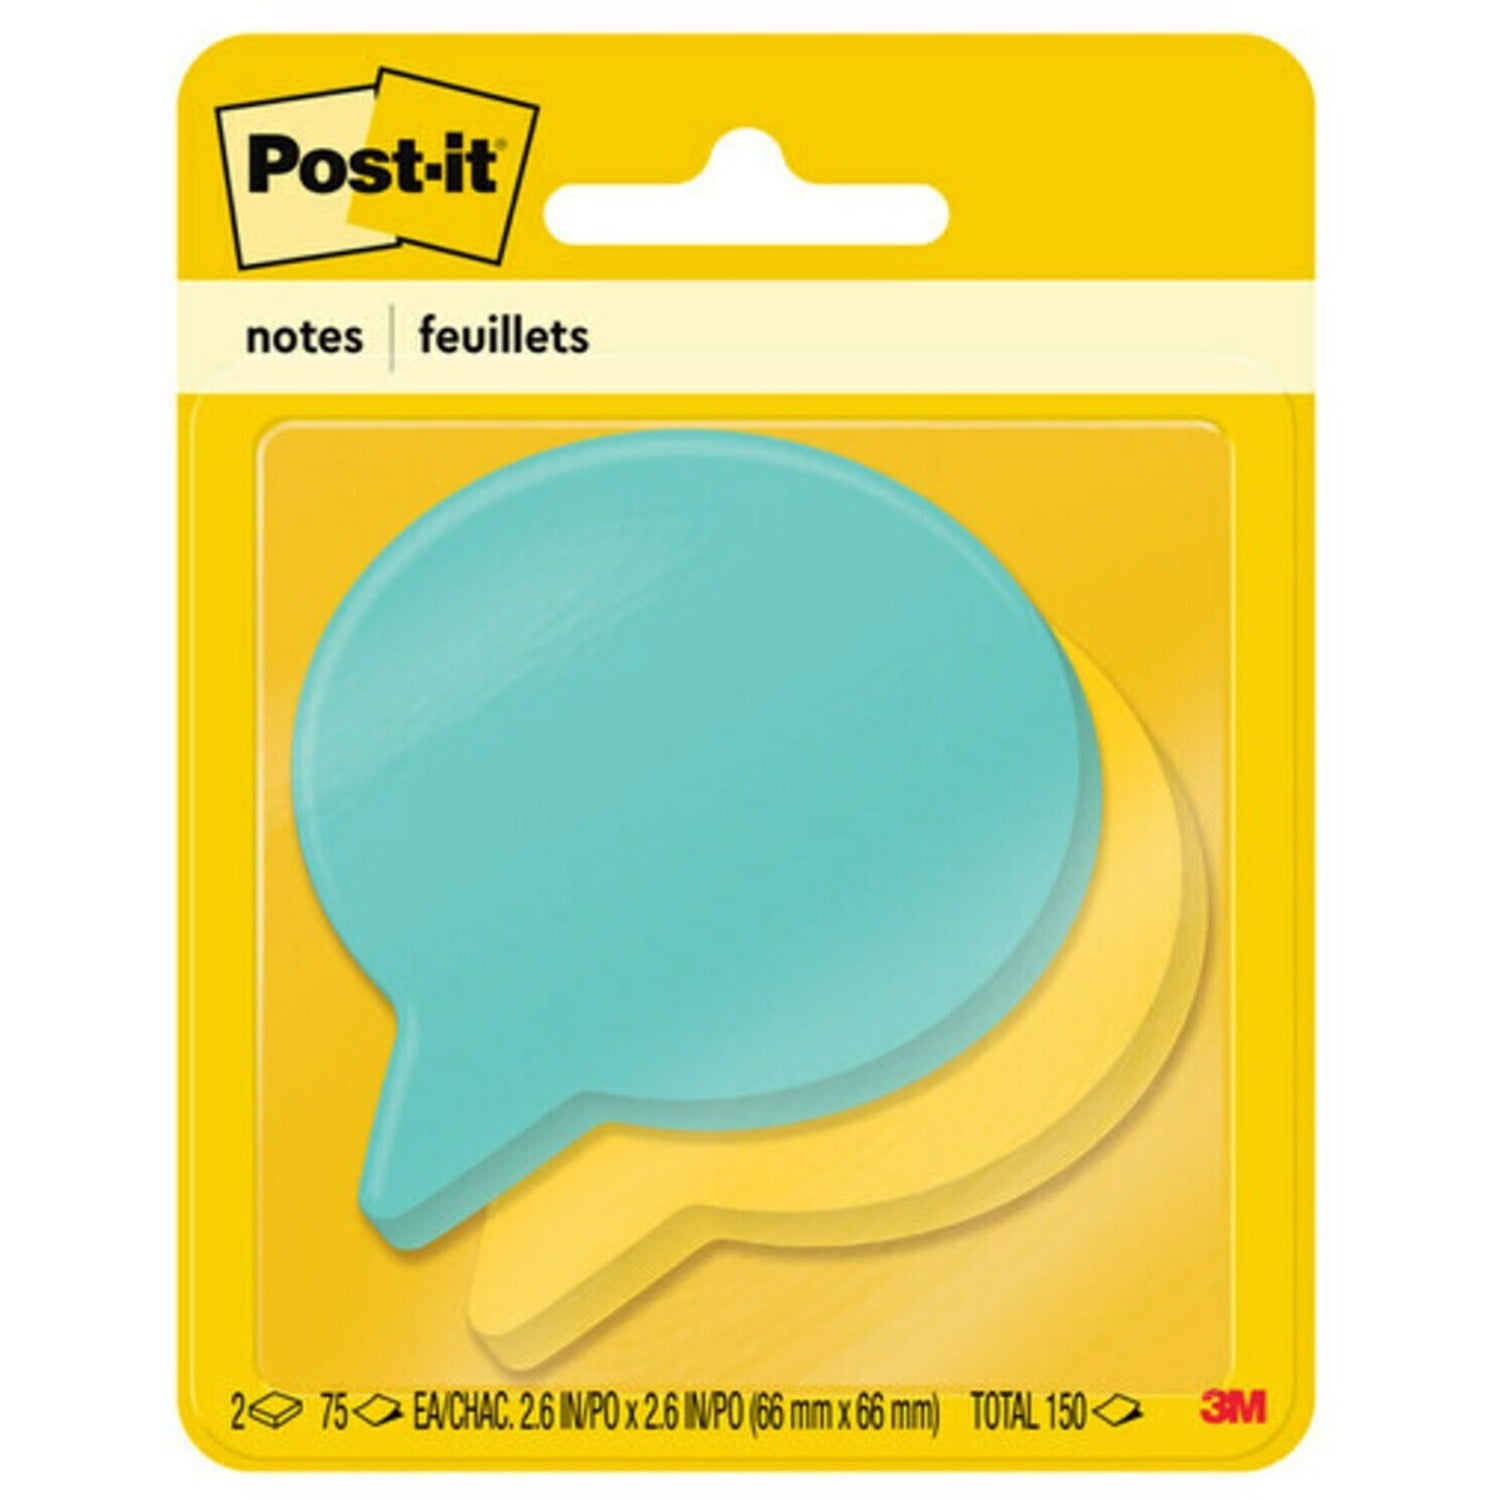 post-it-die-cut-notes-150-x-assorted-3-x-3-thought-bubble-75-sheets-per-pad-blue-green-die-cut-self-adhesive-2-pack_mmm7350blb - 1